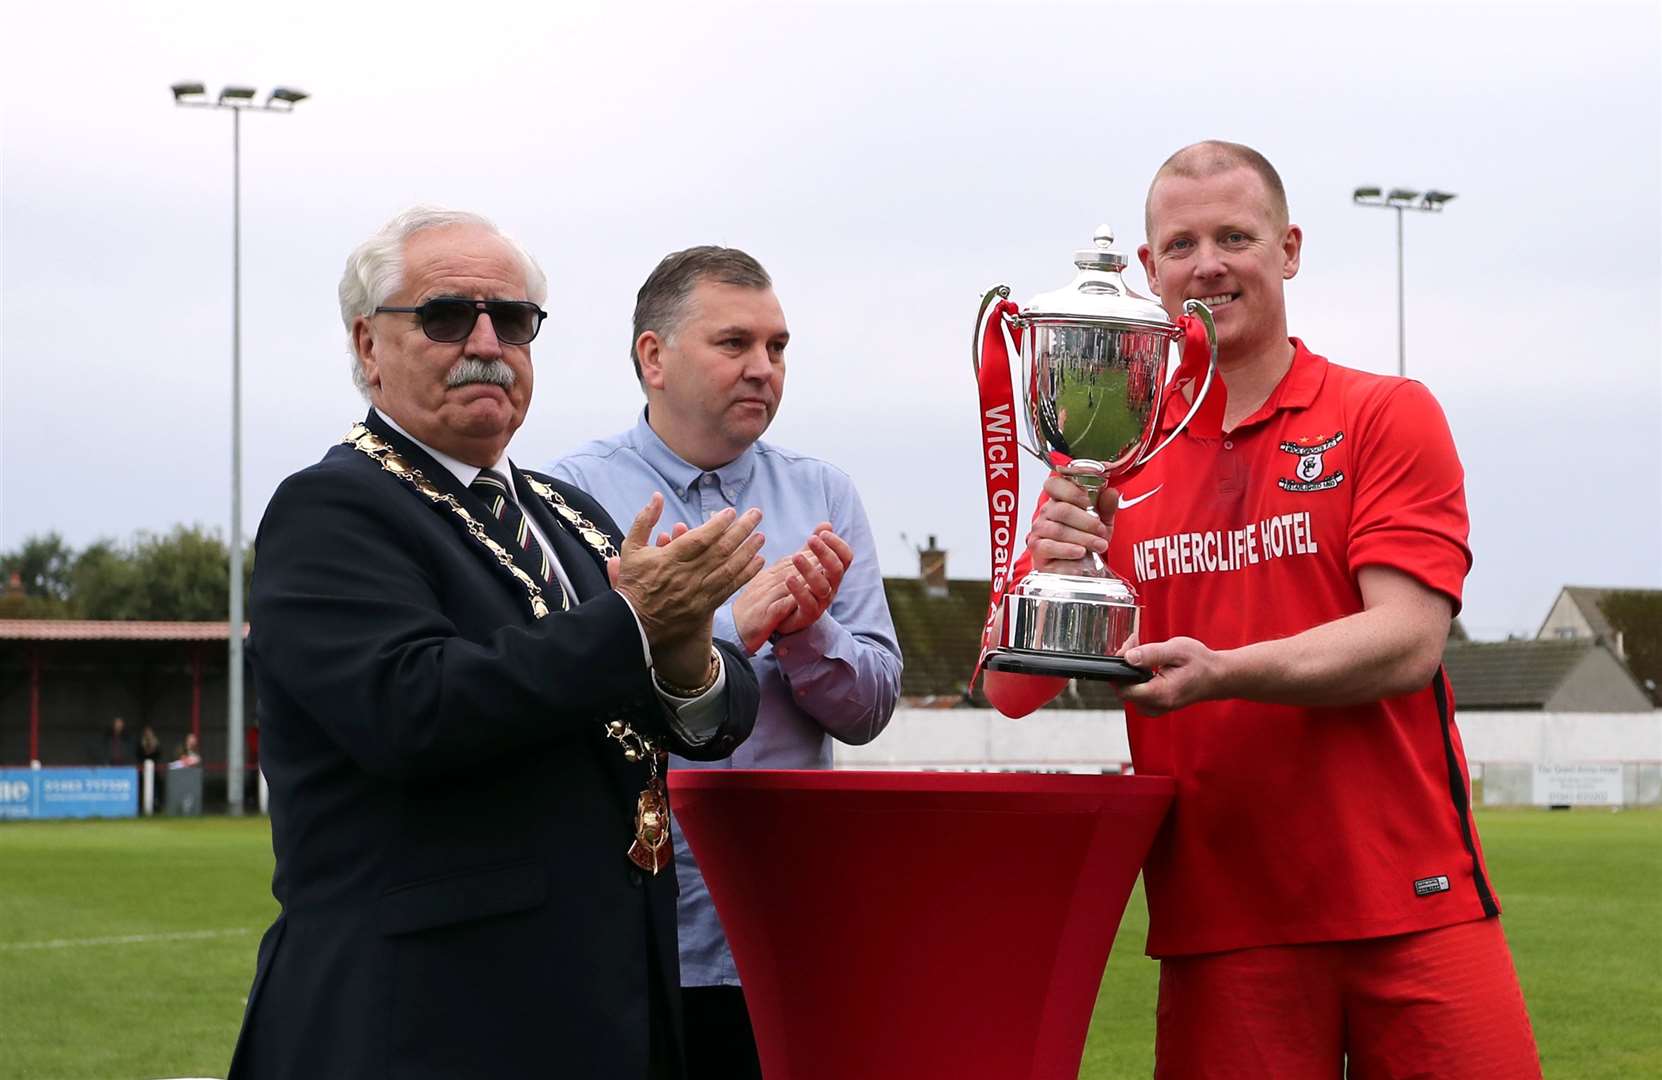 Wick Groats are the defending champions